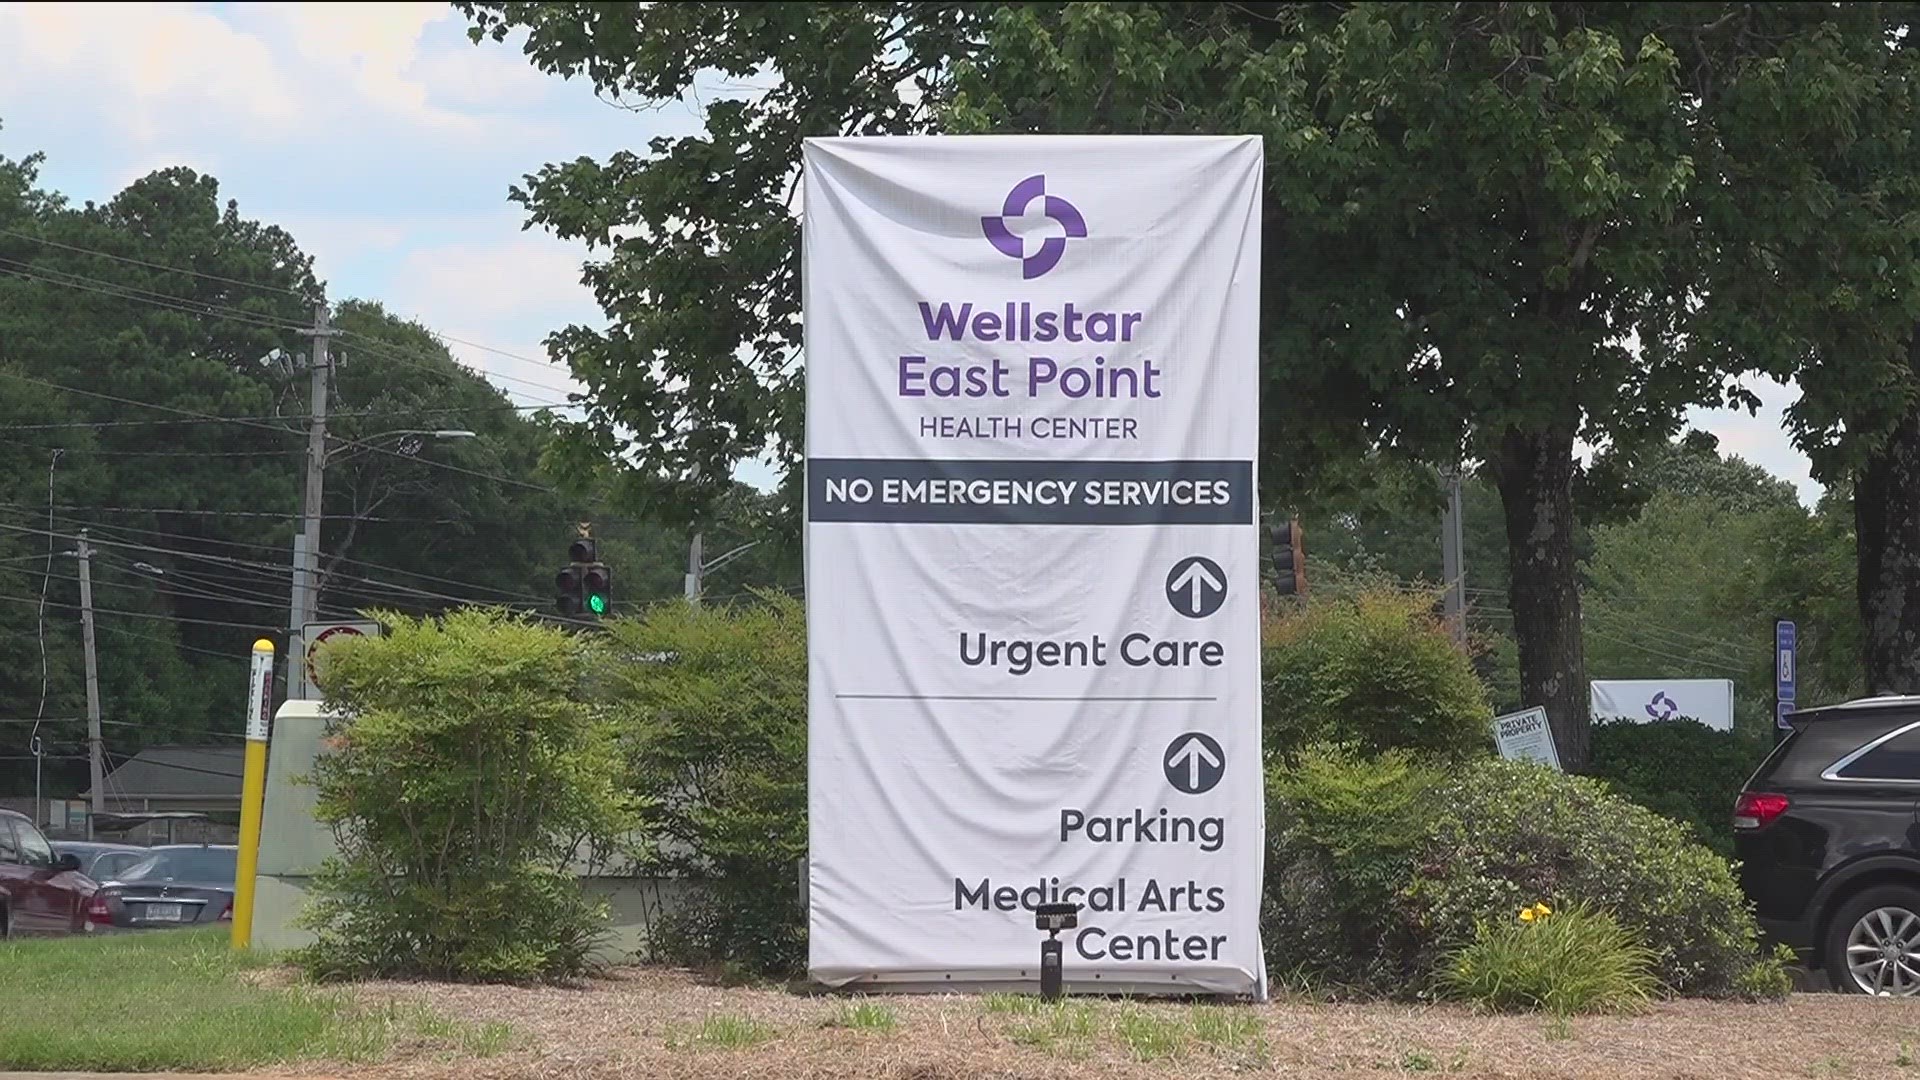 Residents in the city have been without an emergency department for over a year now.